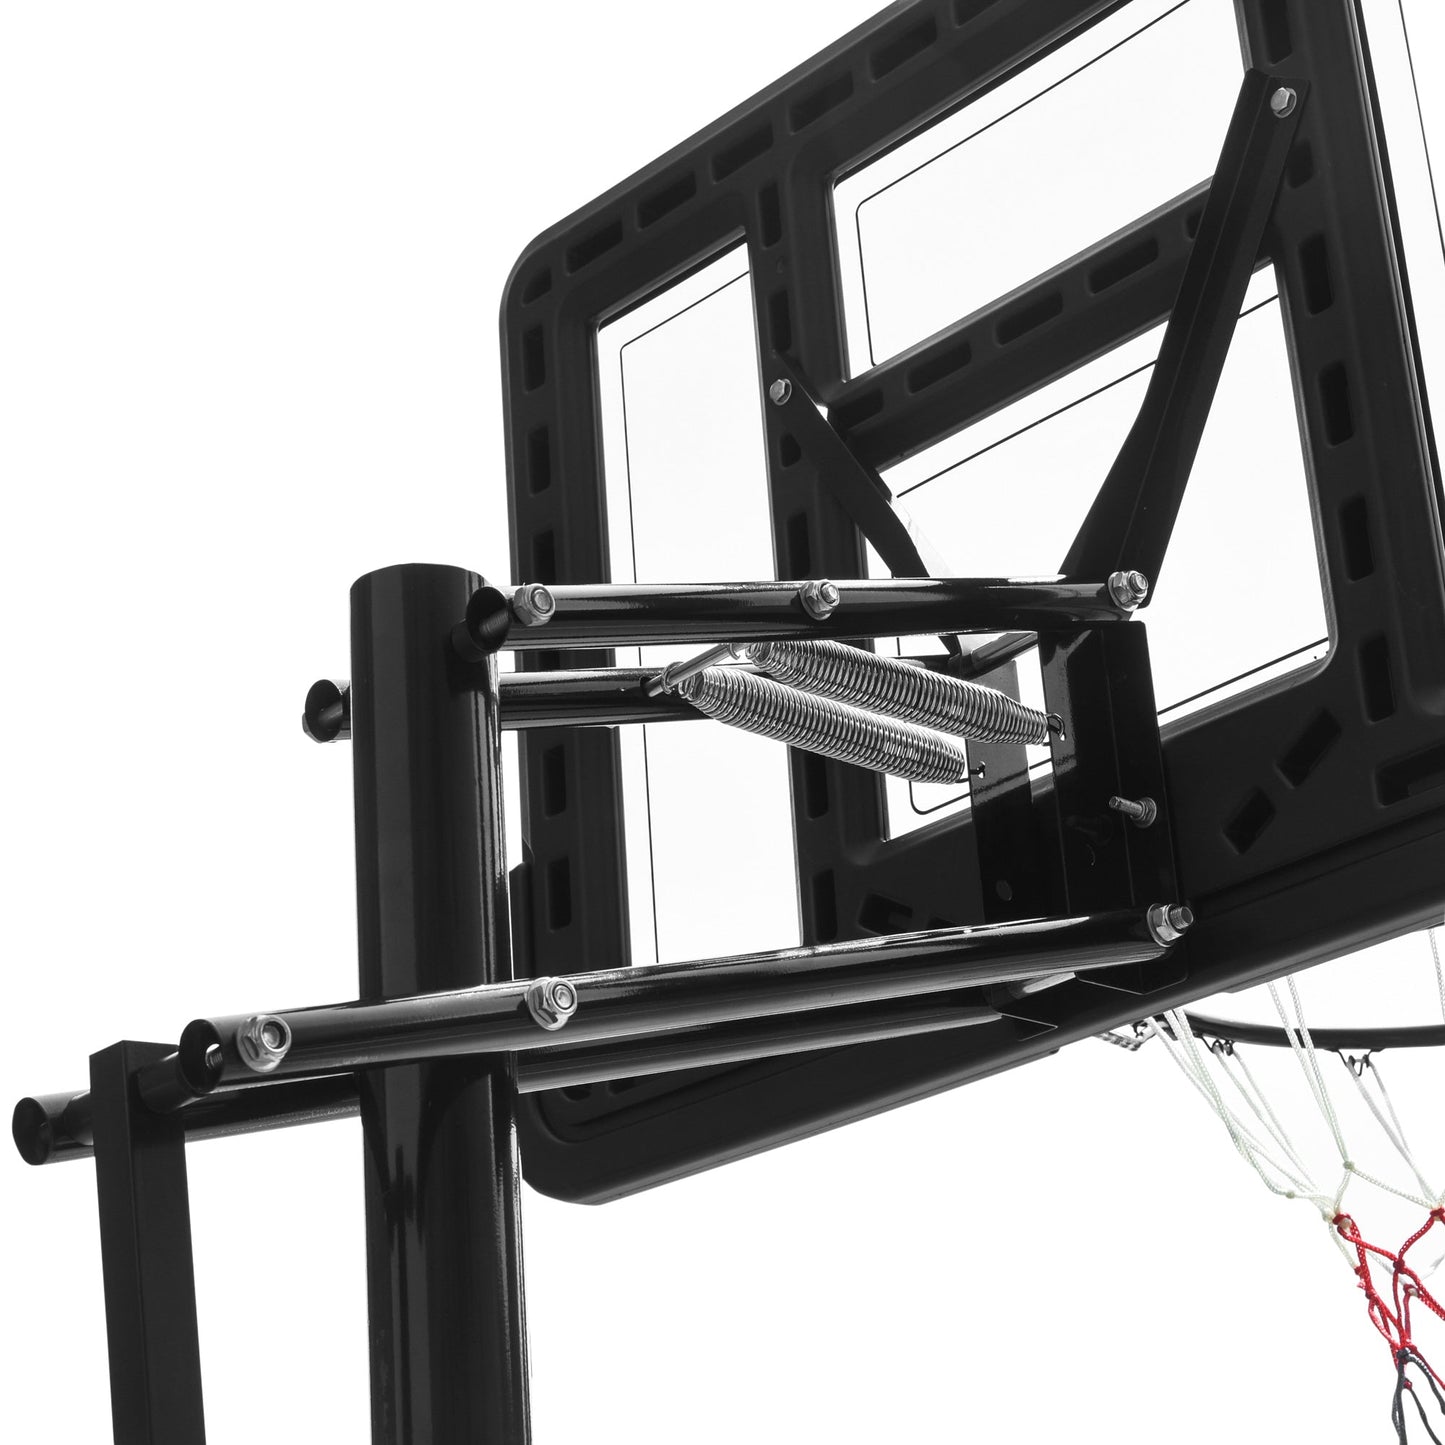 Portable Basketball Hoop System Stand Simple Lift Function from 8-10ft Adjustable for Youth Adults Indoor Outdoor Play at Gallery Canada